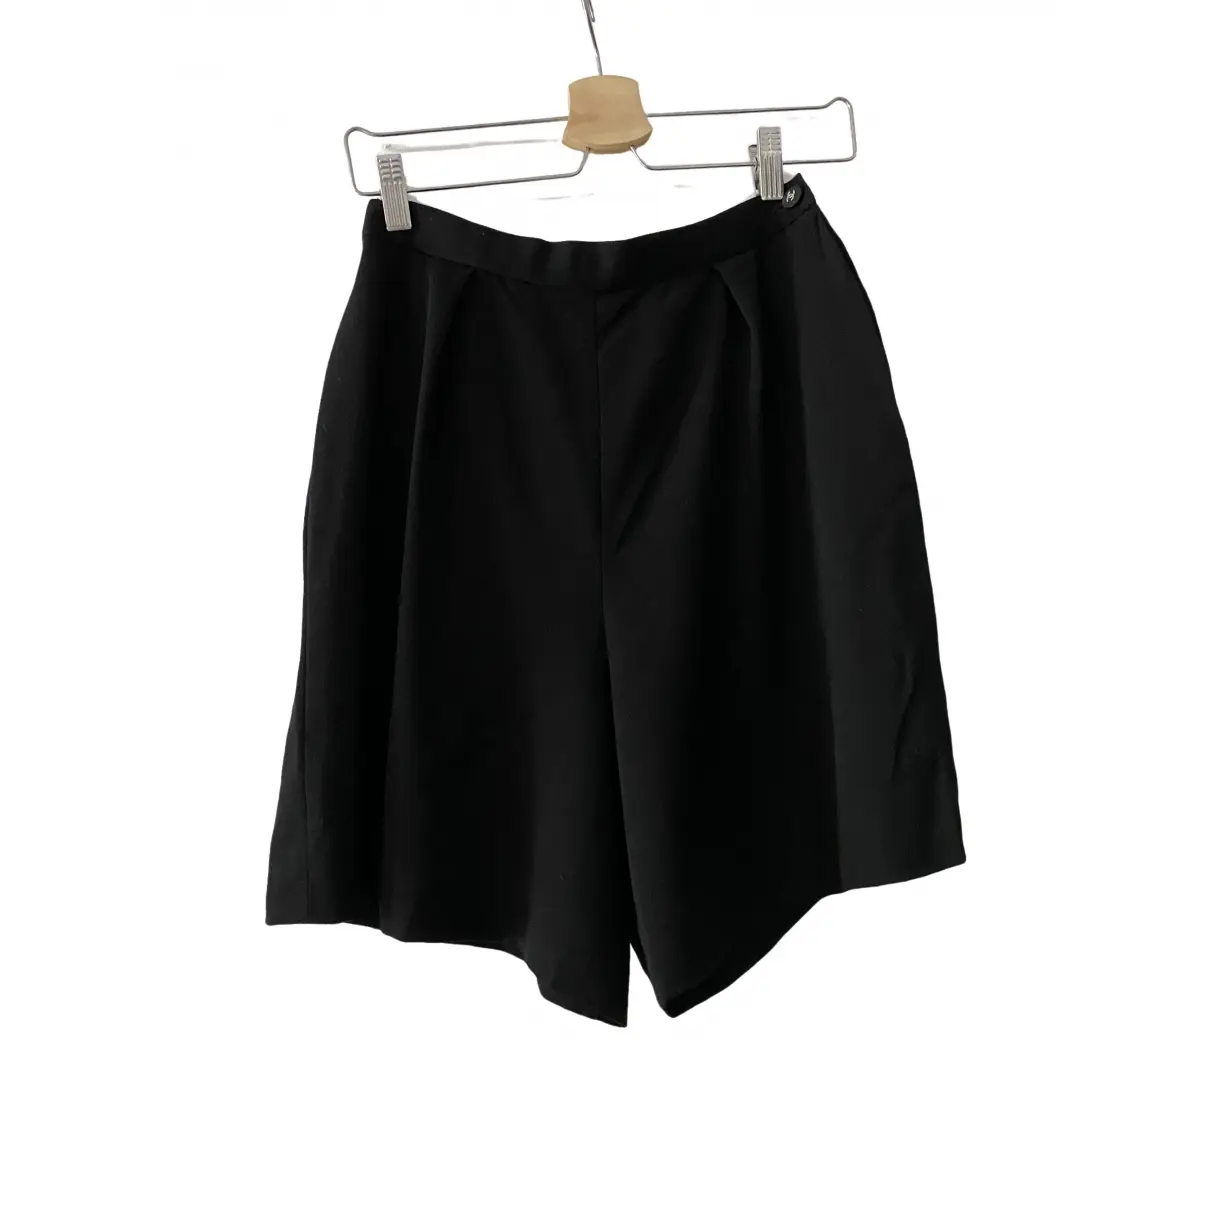 Wool shorts Chanel - Vintage